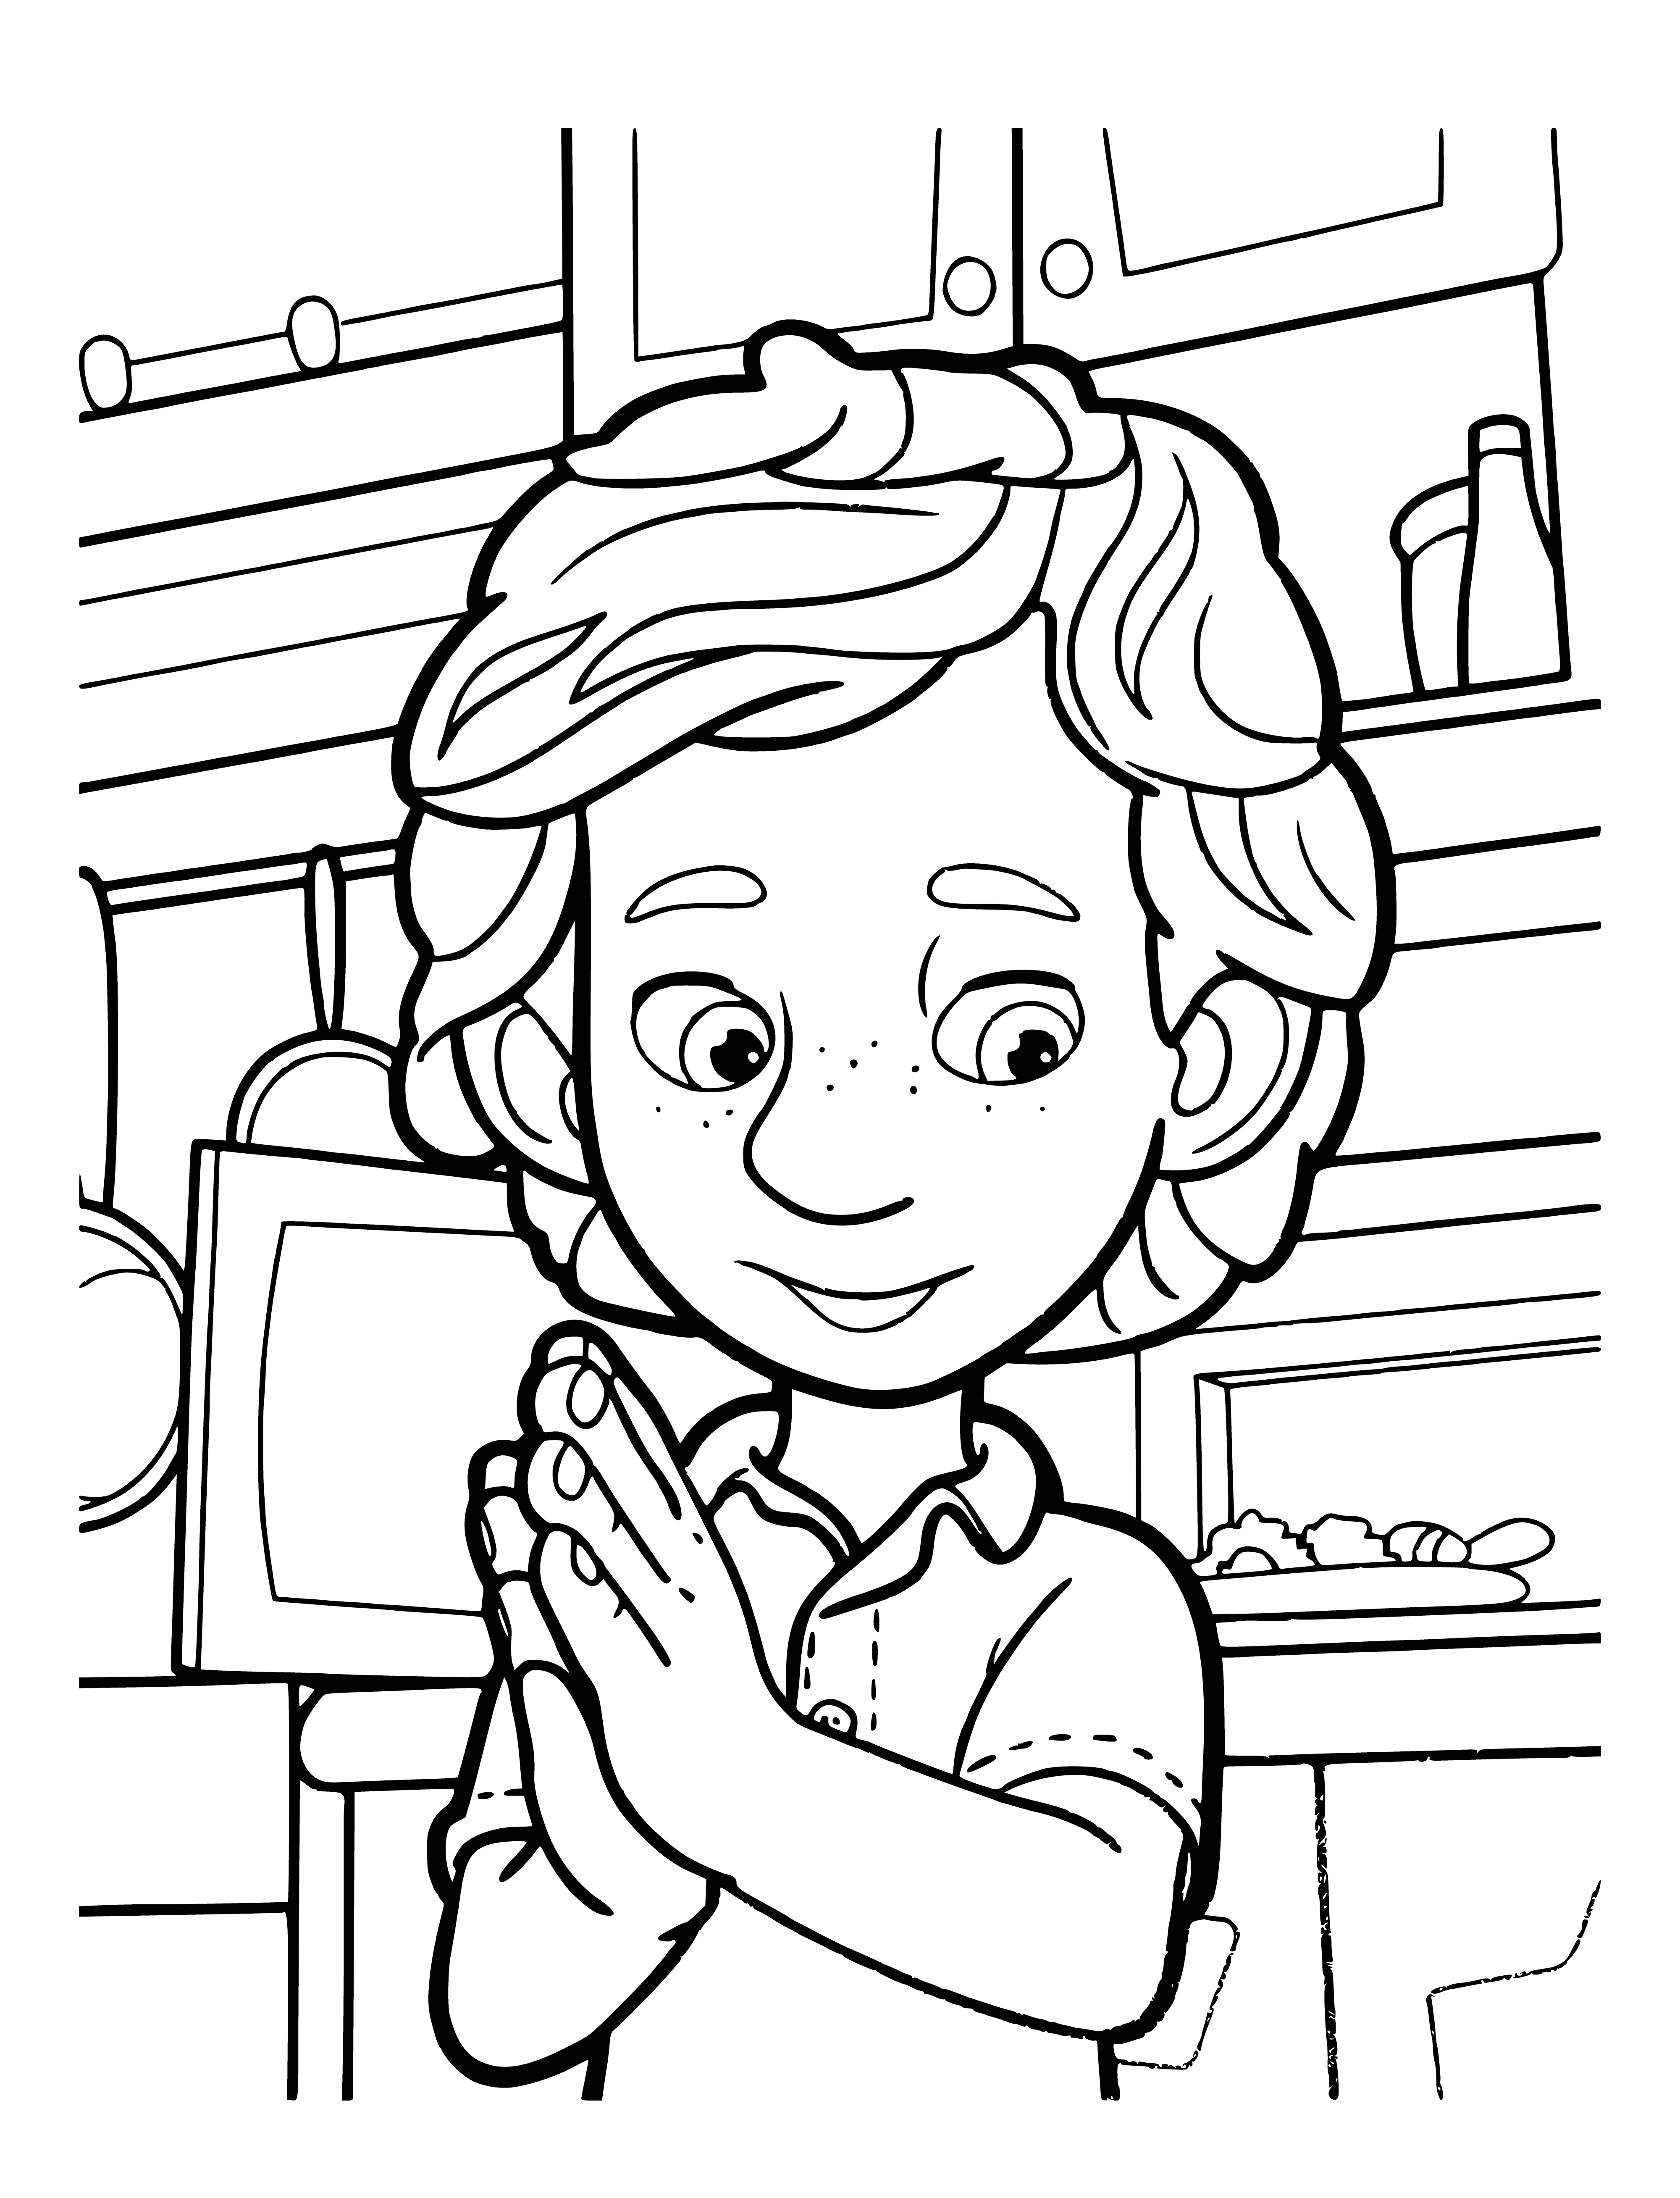 coloring page: Dimych is one Fixie, wearing blue & white, holding screwdriver & light bulb, smiling on ladder next to lightbulb.